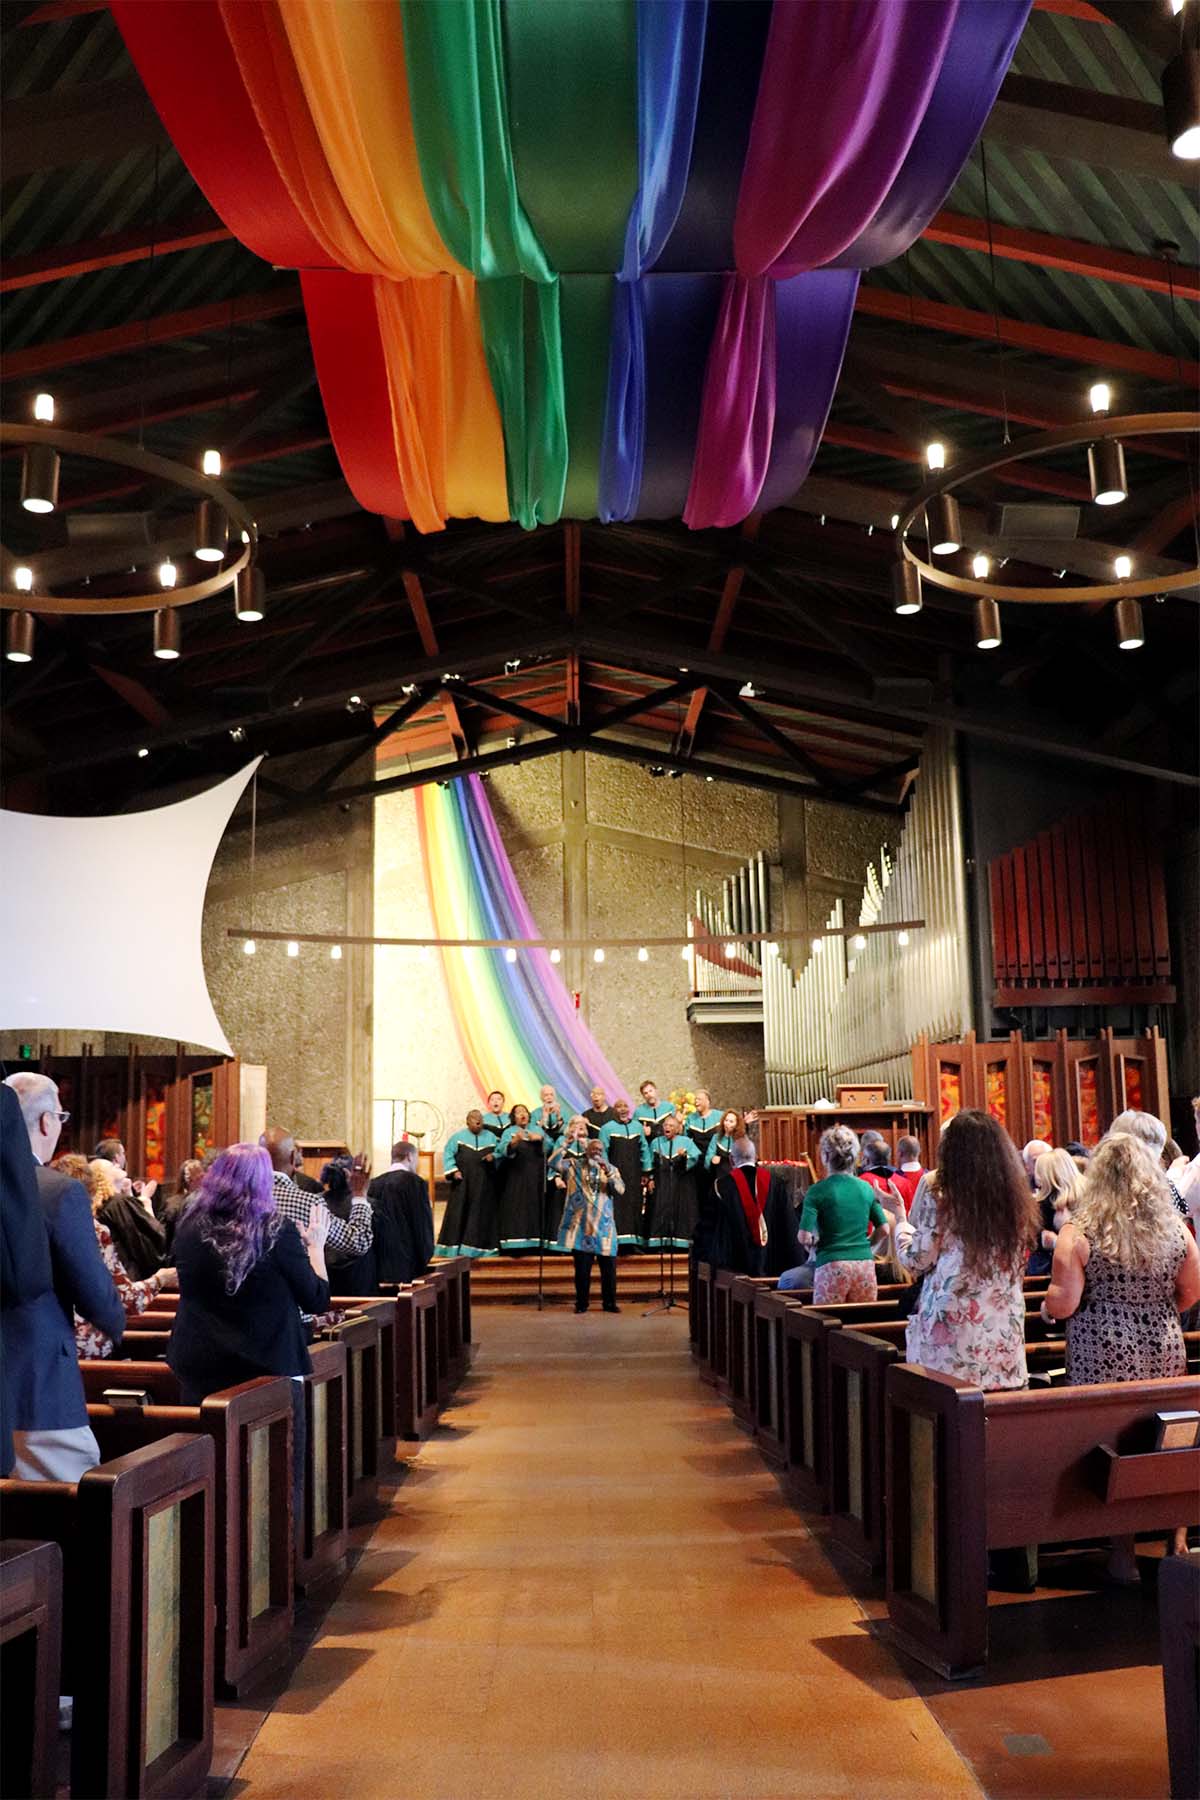 The Unitarian Universalist Church of Berkeley hosted the 2024 Commencement ceremony where a choir performed on a stage at the front of the church, adorned with large, vibrant rainbow banners hanging from the ceiling. The audience in the pews watched attentively.